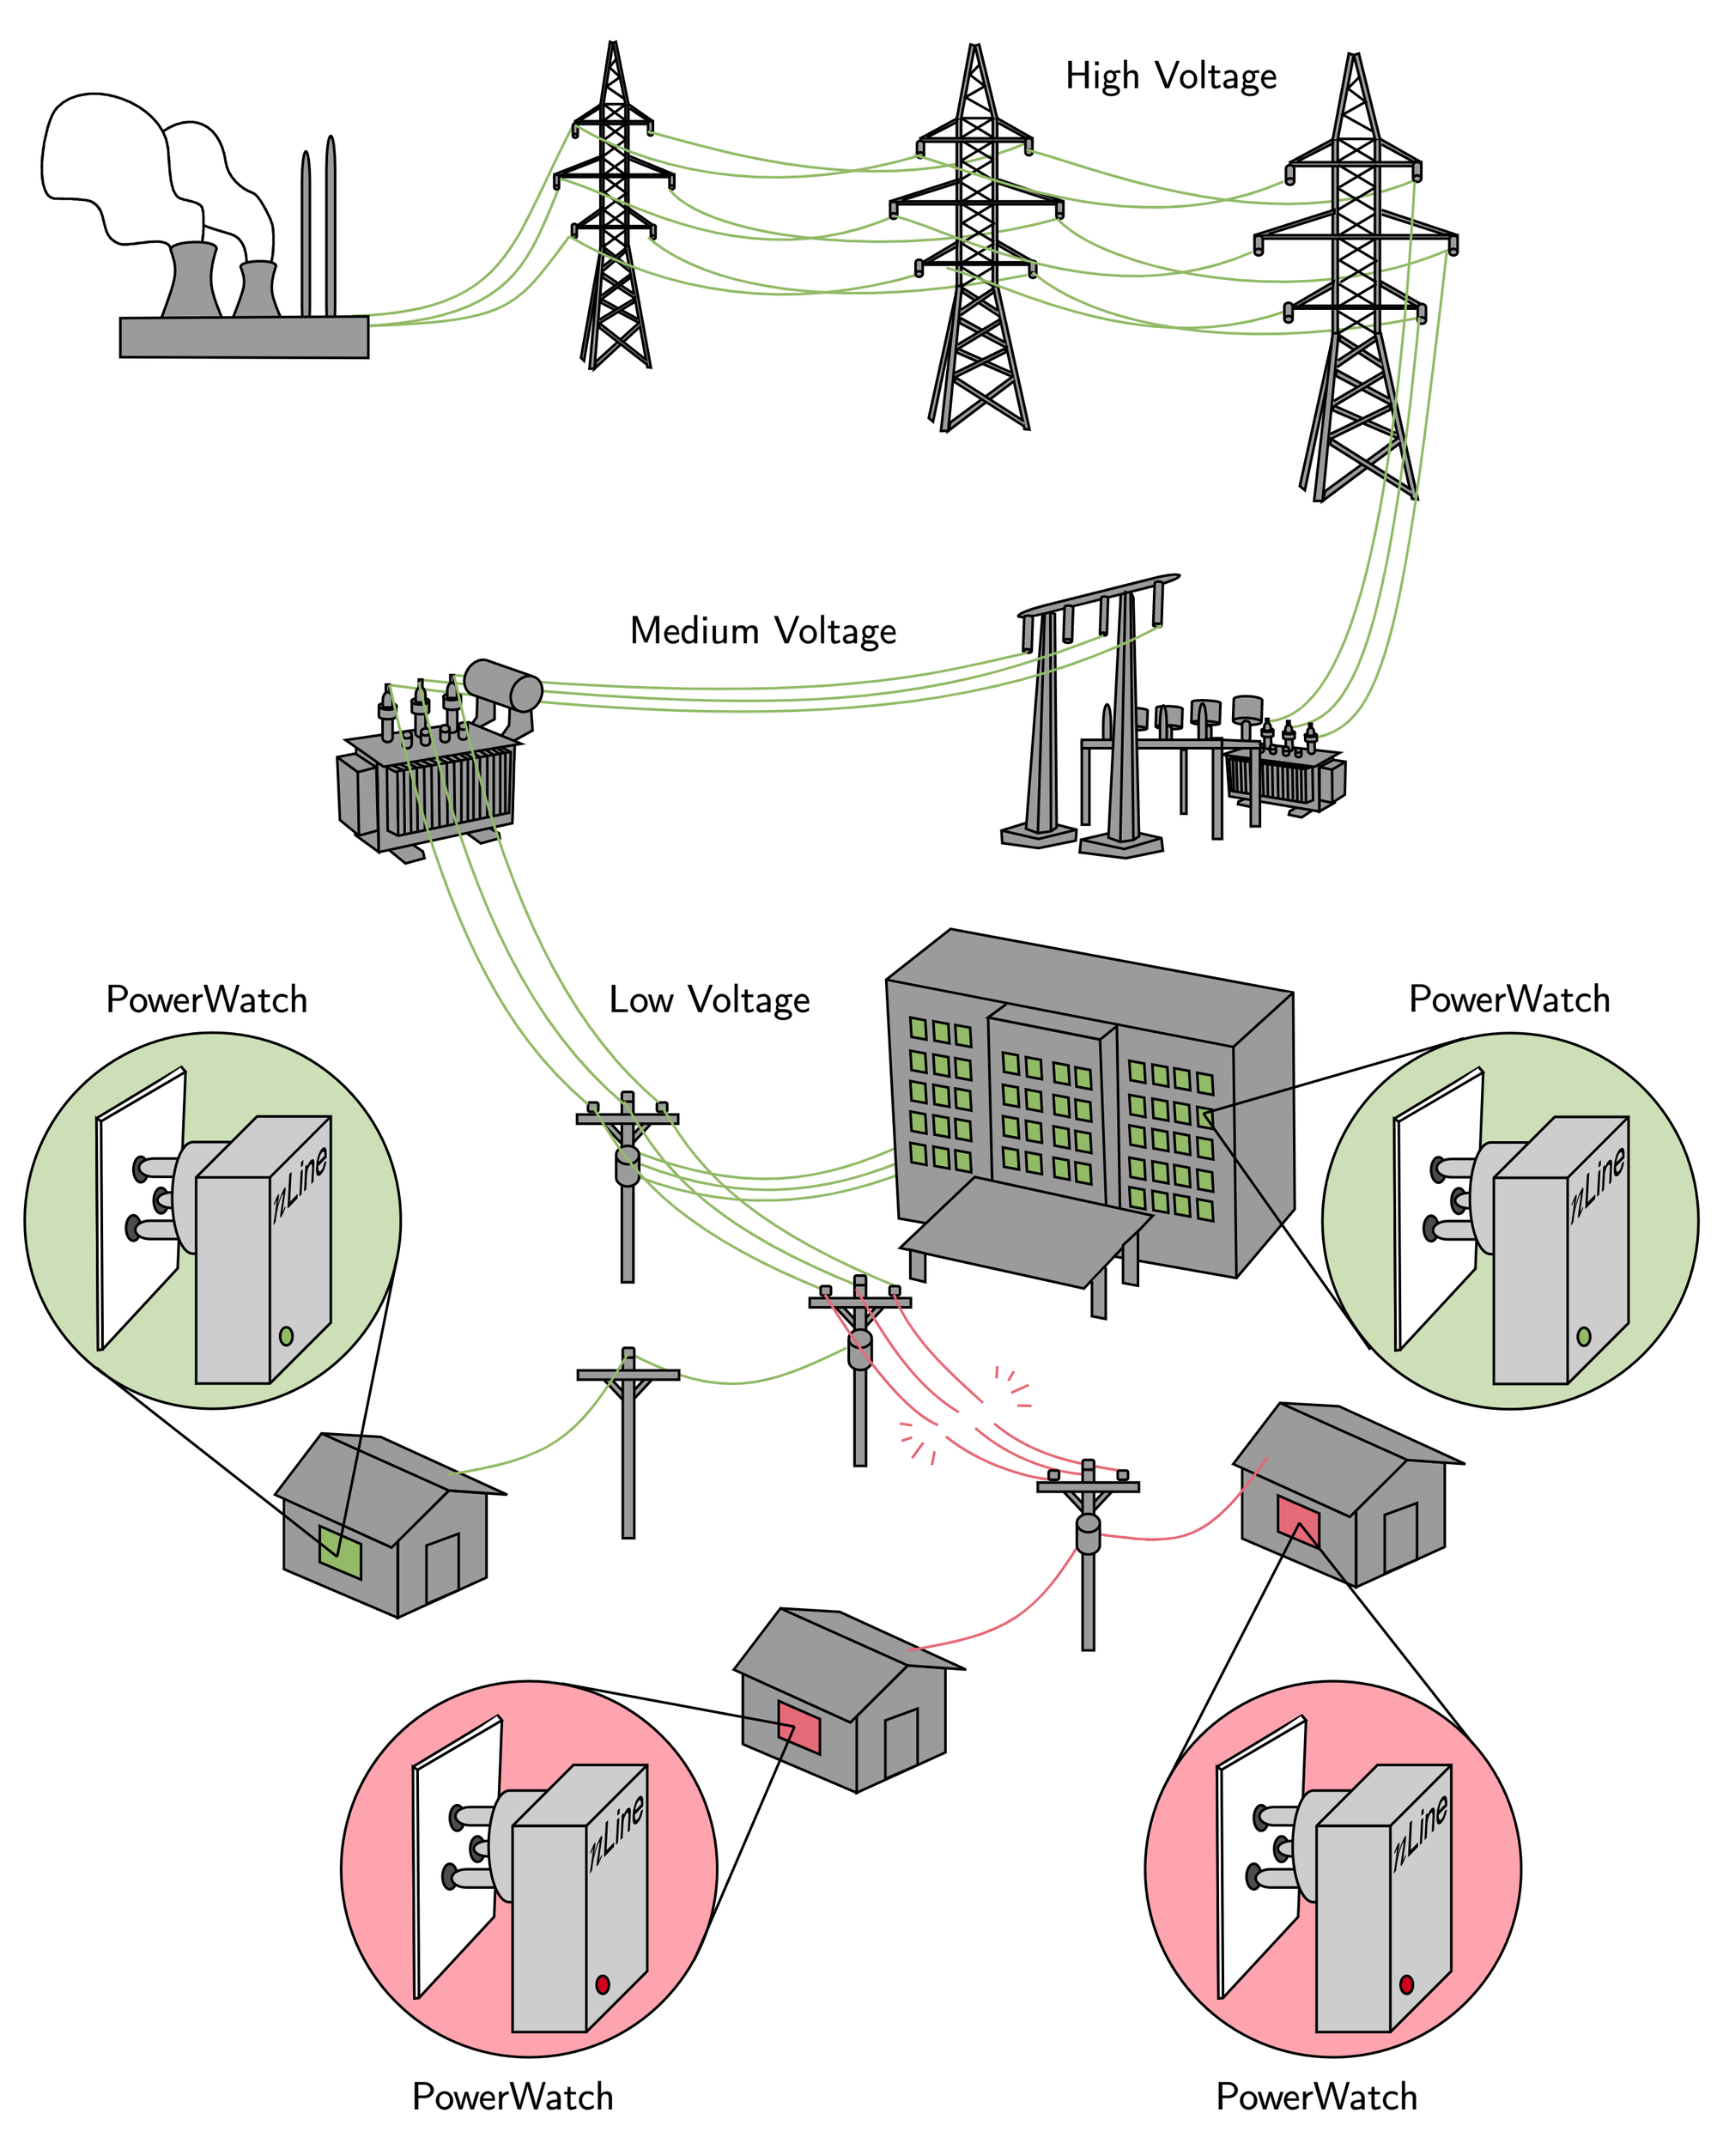 Figure 2. PowerWatch devices are deployed in homes, businesses, and social infrastructure at the outlet. At the time of writing, there are 1,258 sensors deployed in Accra, Ghana, which cover 441 of the 8,535 DSS (LV) transformers in the city.